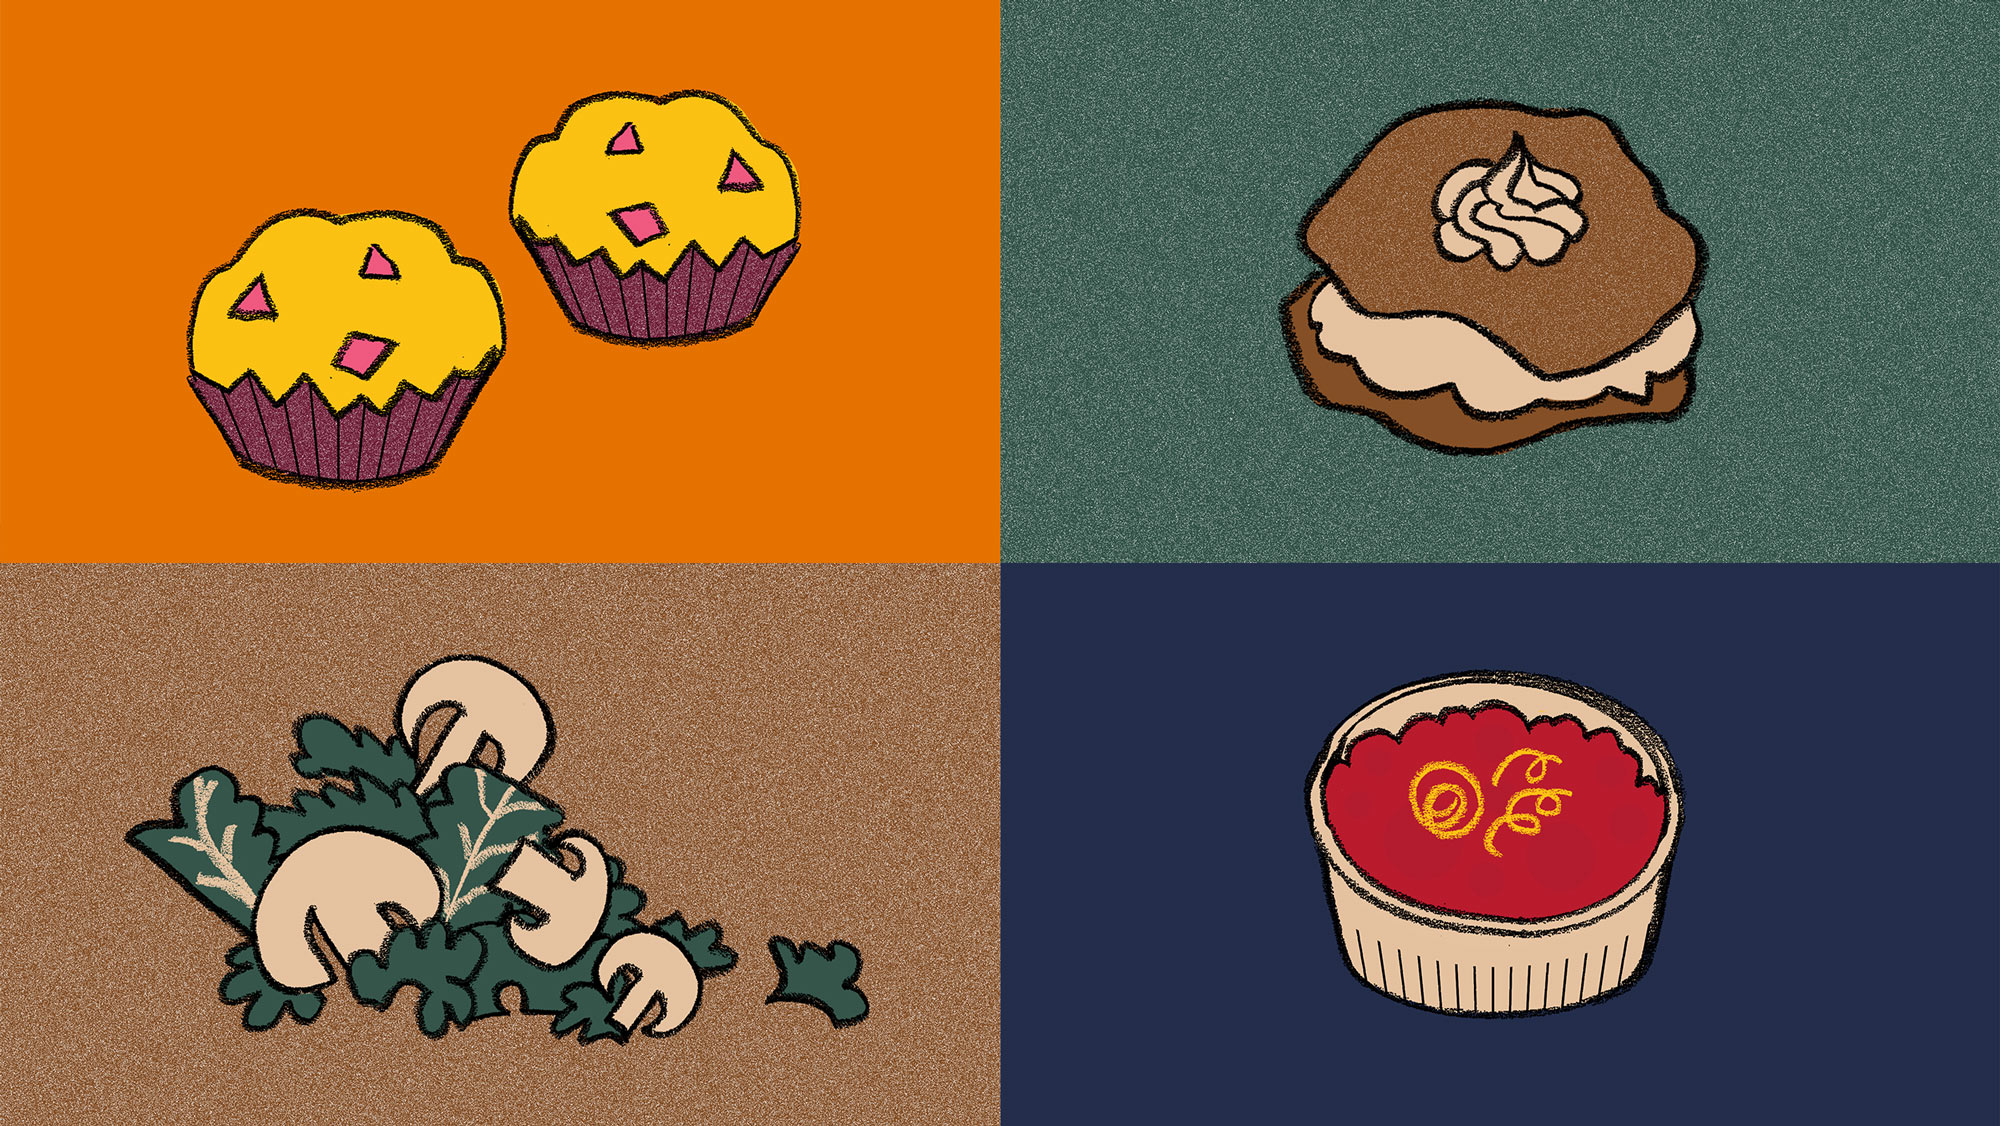 top left: two cupcakes, top right: icecream cookie, bottom left, mushroom and greens, bottom right: spaghetti